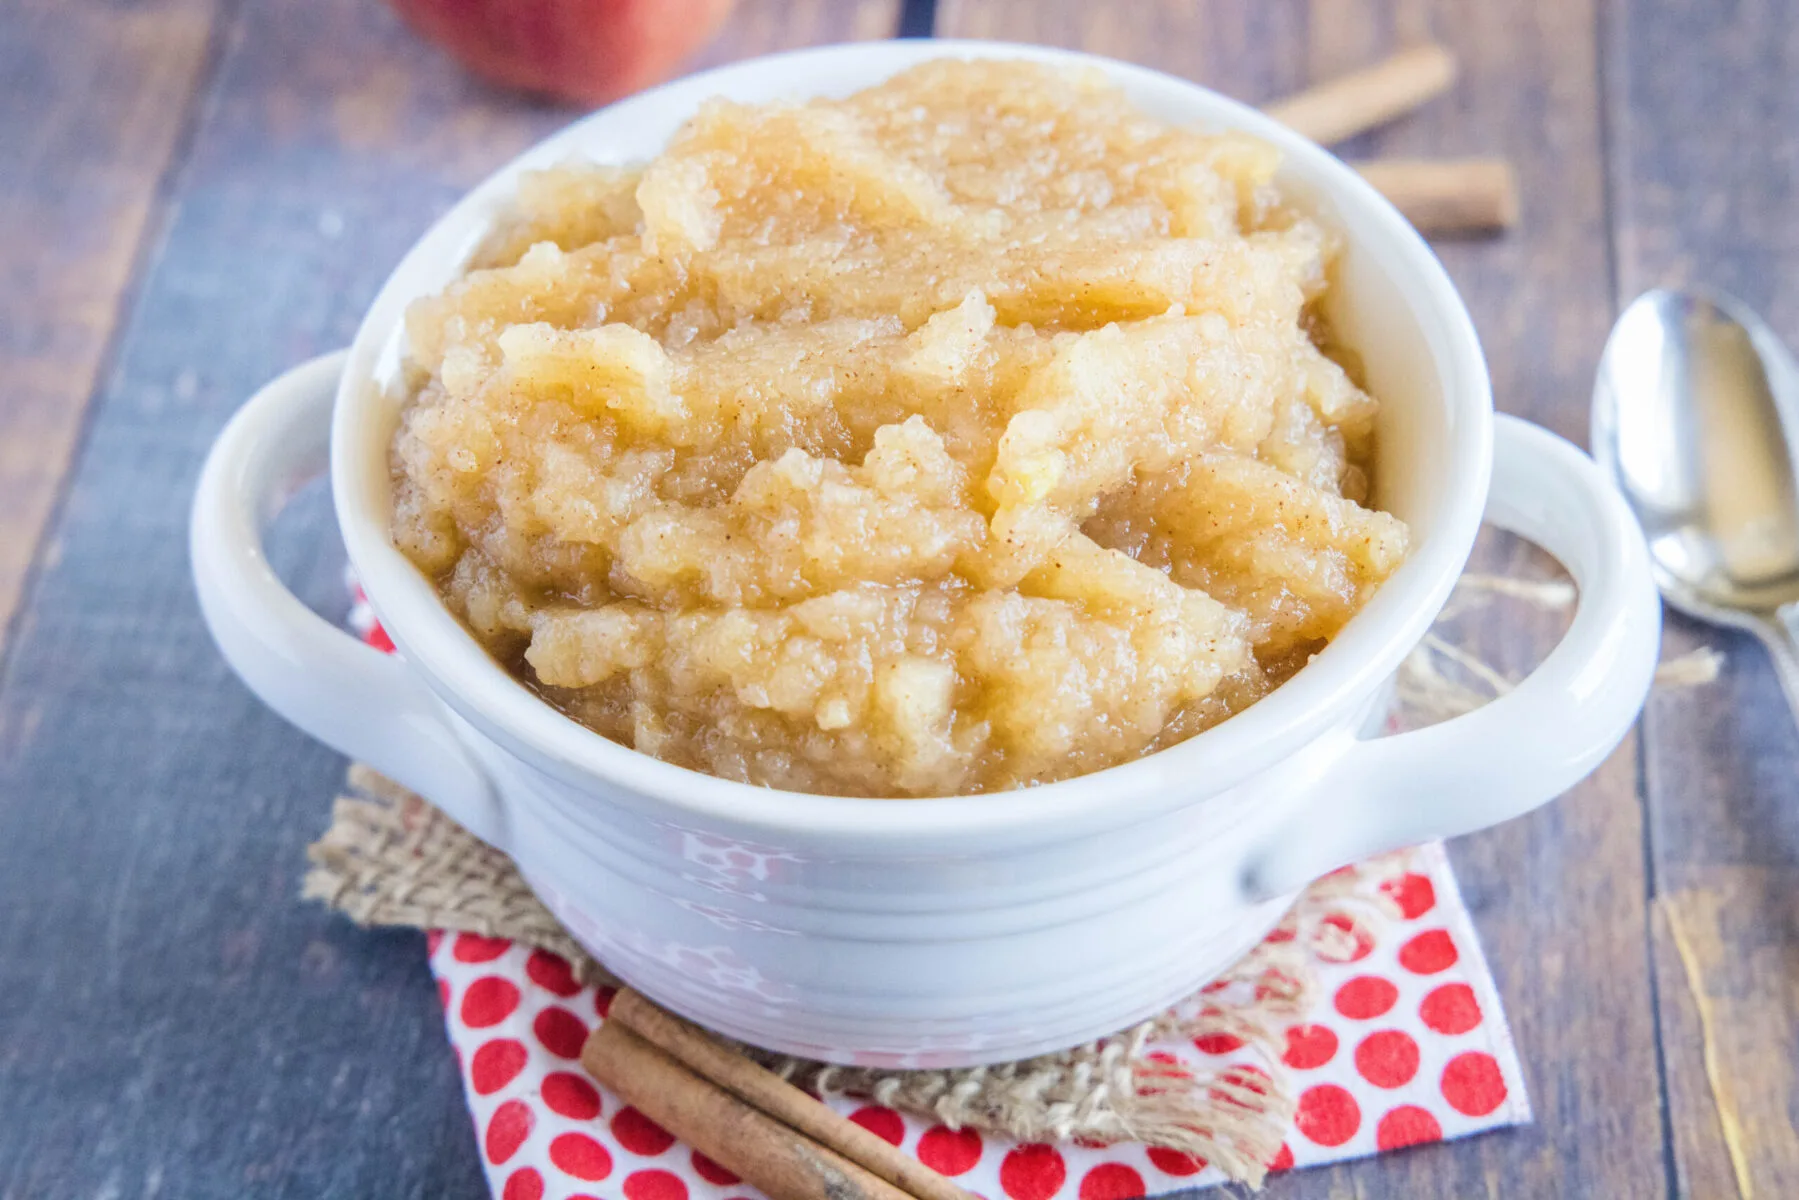 A bowl of applesauce surrounded by cinnamon sticks and a spoon